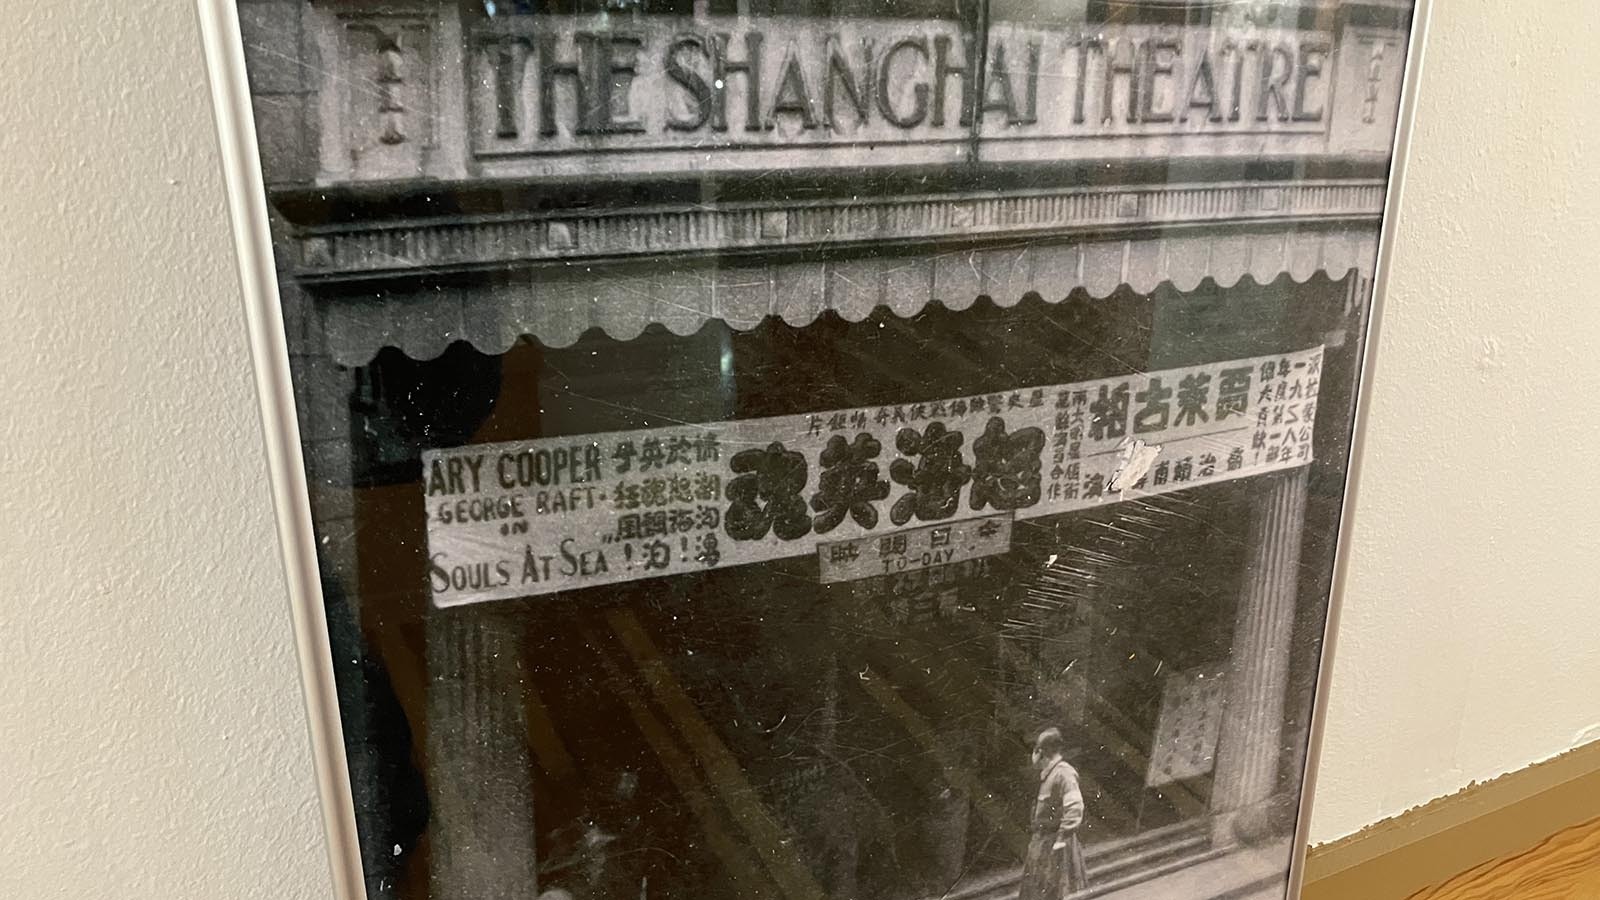 Clarence Gehrett’s photo of The Shanghai Theatre possibly in 1937 as it promotes the movie “Souls at Sea.”